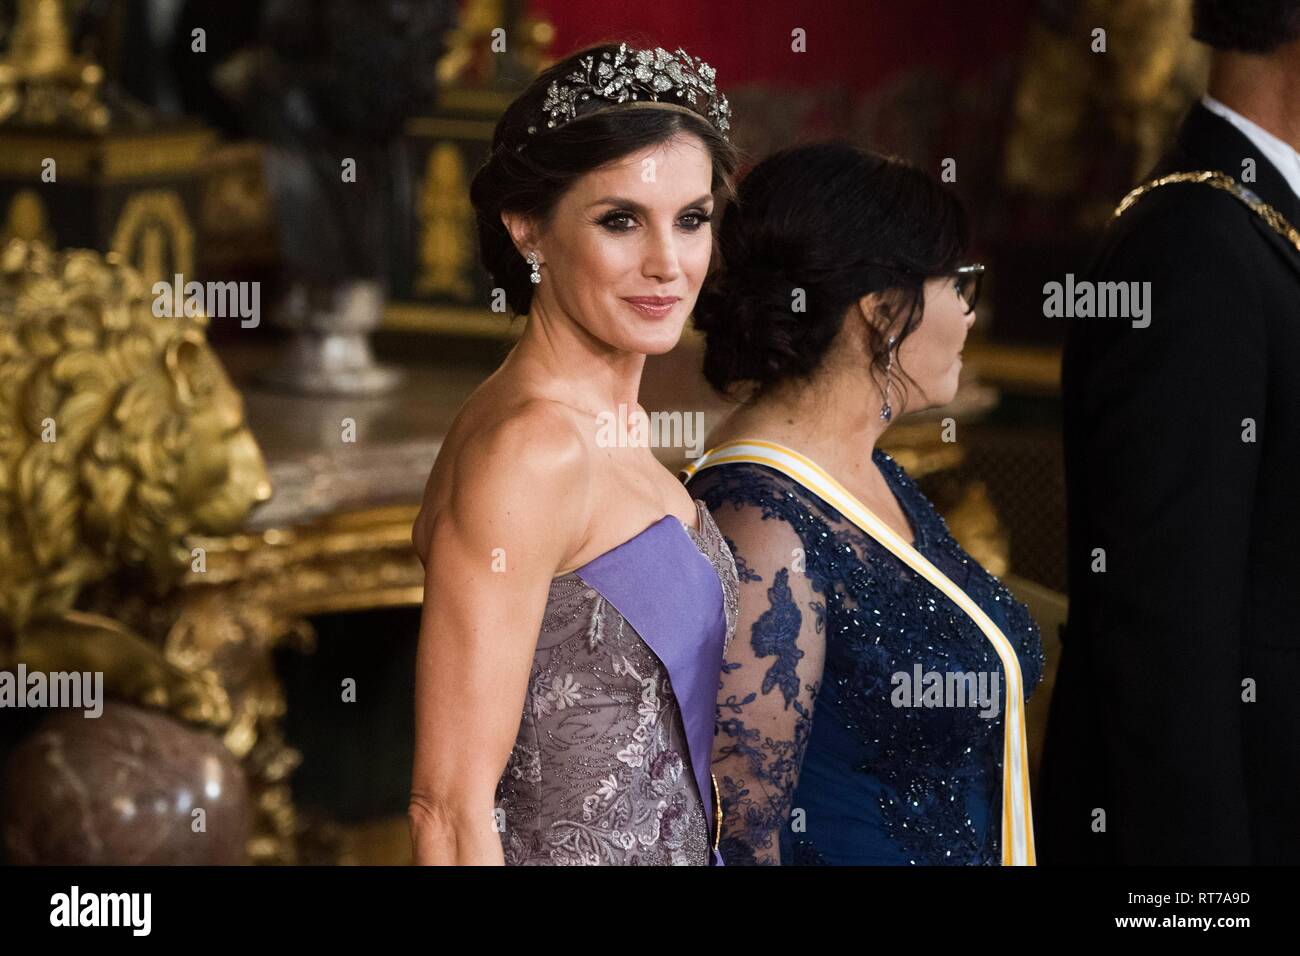 Queen Letizia of Spain during the visit of the President of Peru Martin Vizcarra to Spain at Royal Palace in Madrid. Stock Photo